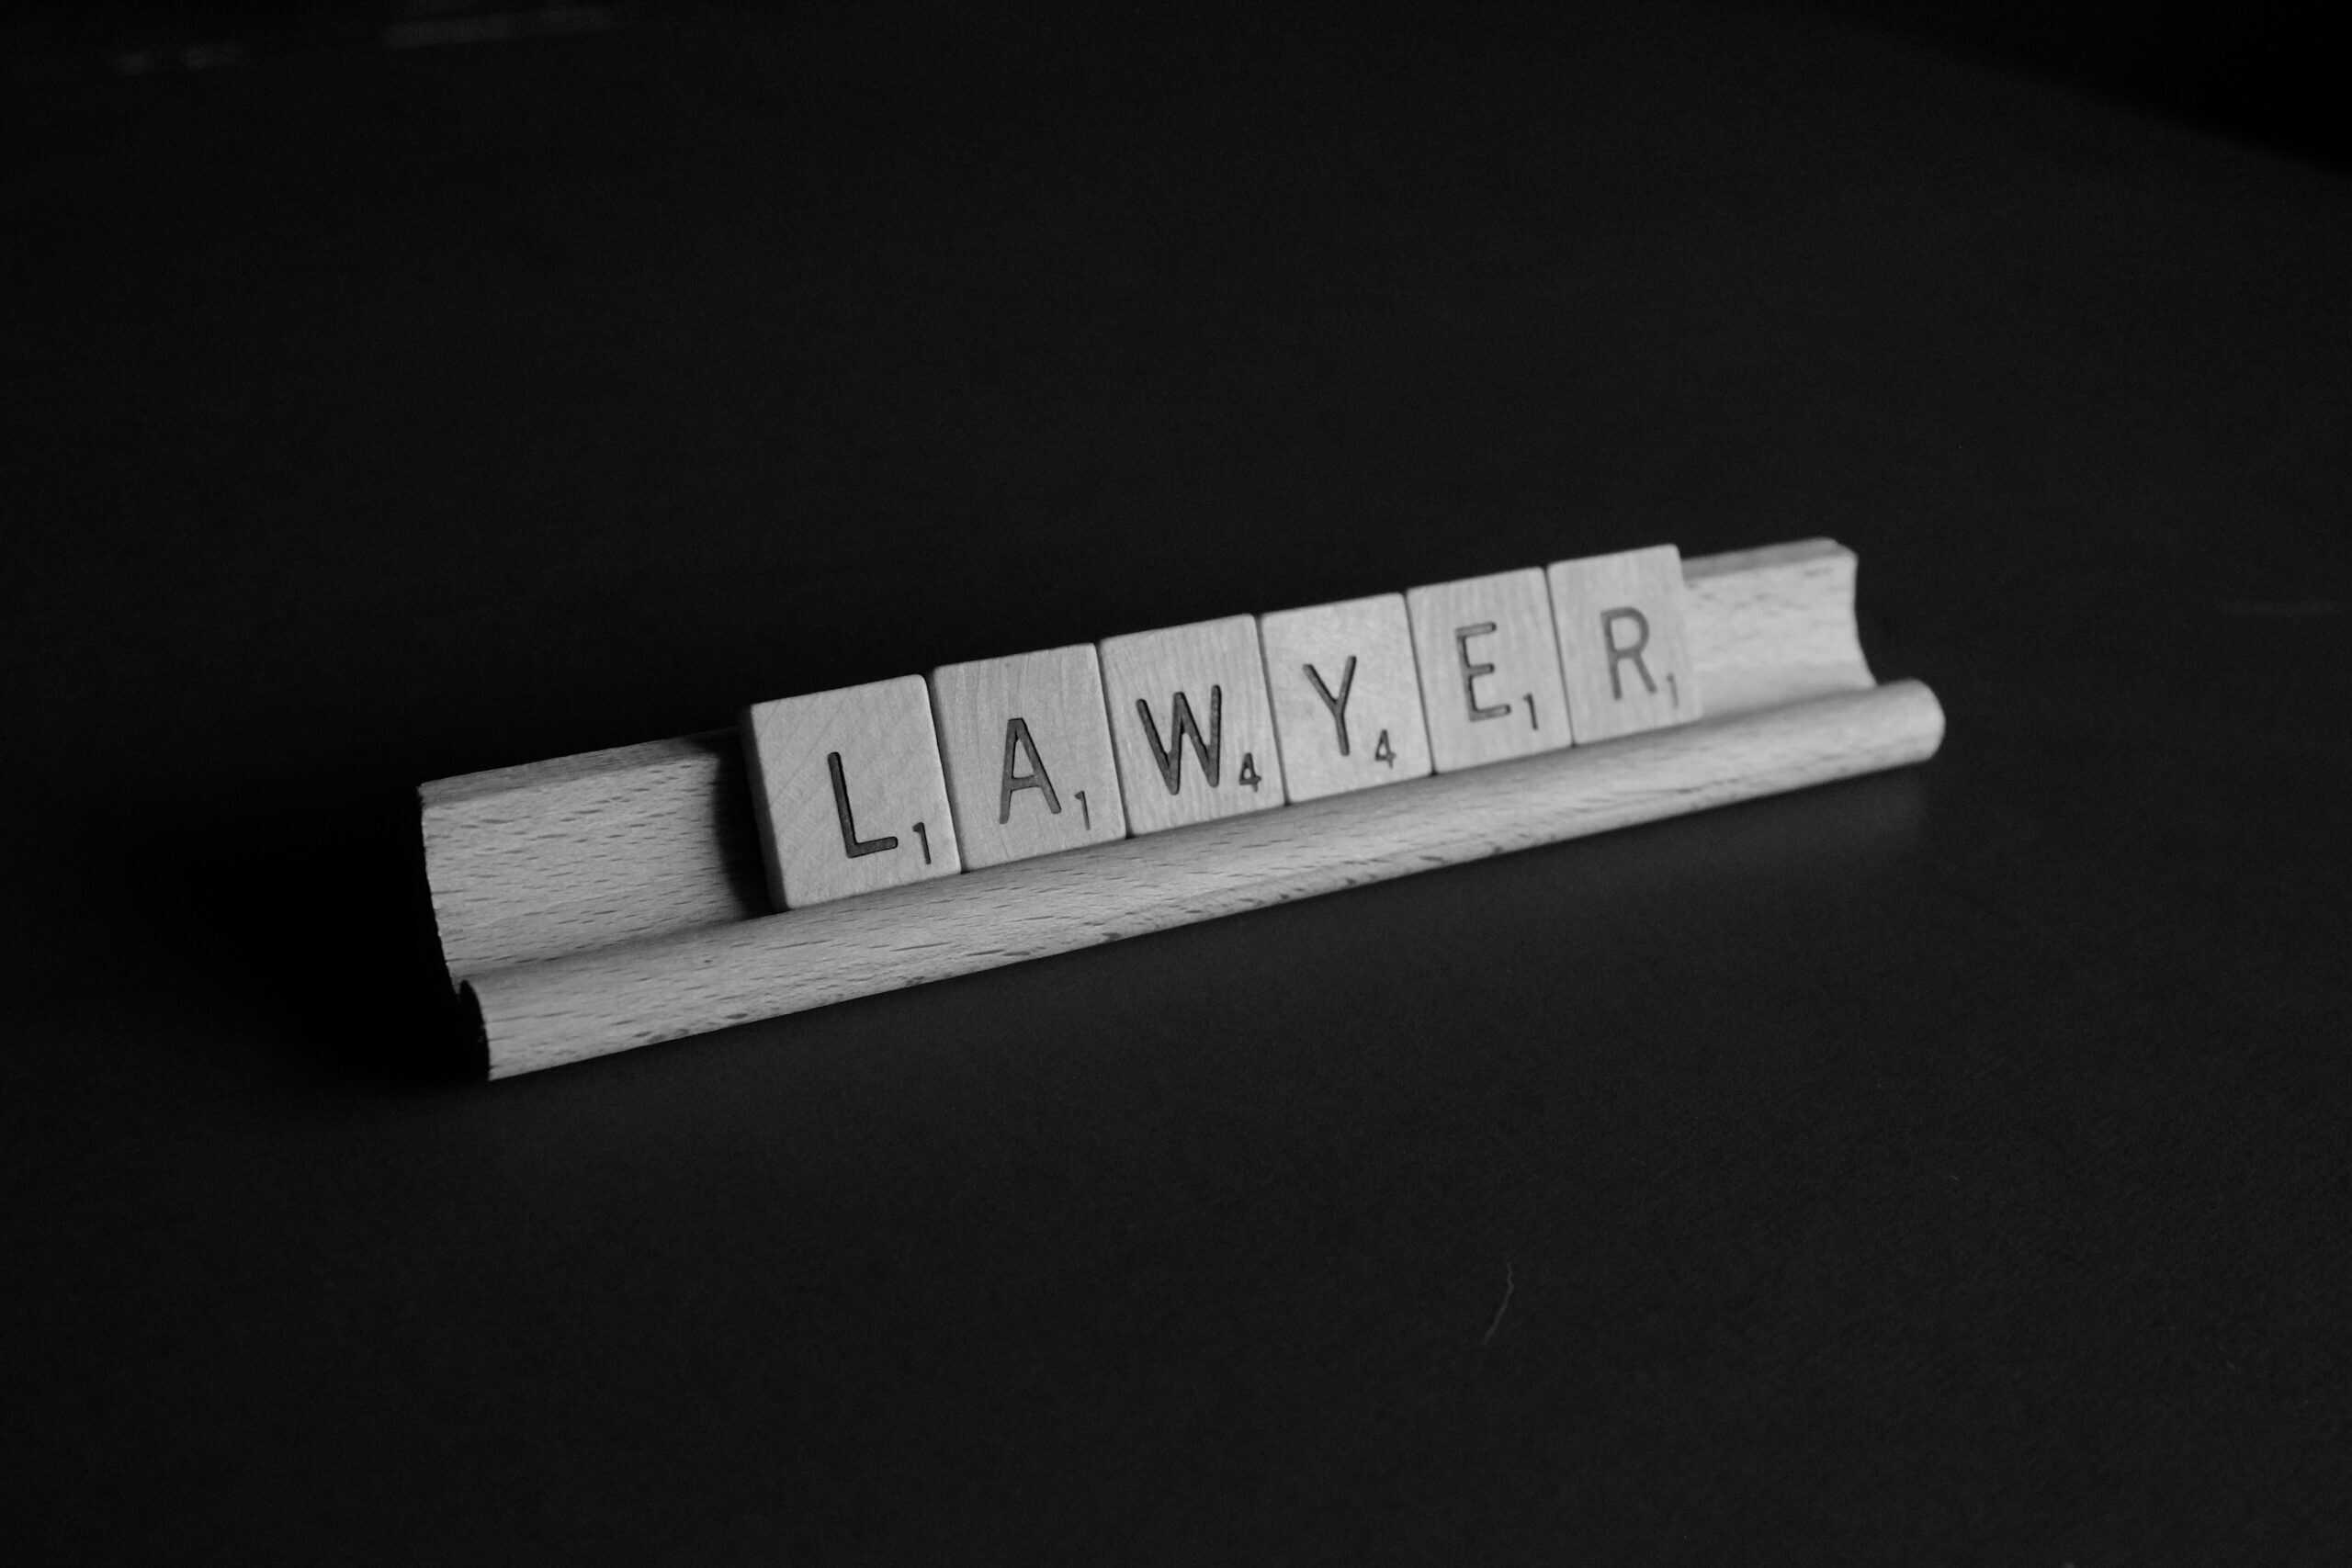 New Tricks: How Can We Teach Lawyers To Adopt Tech?